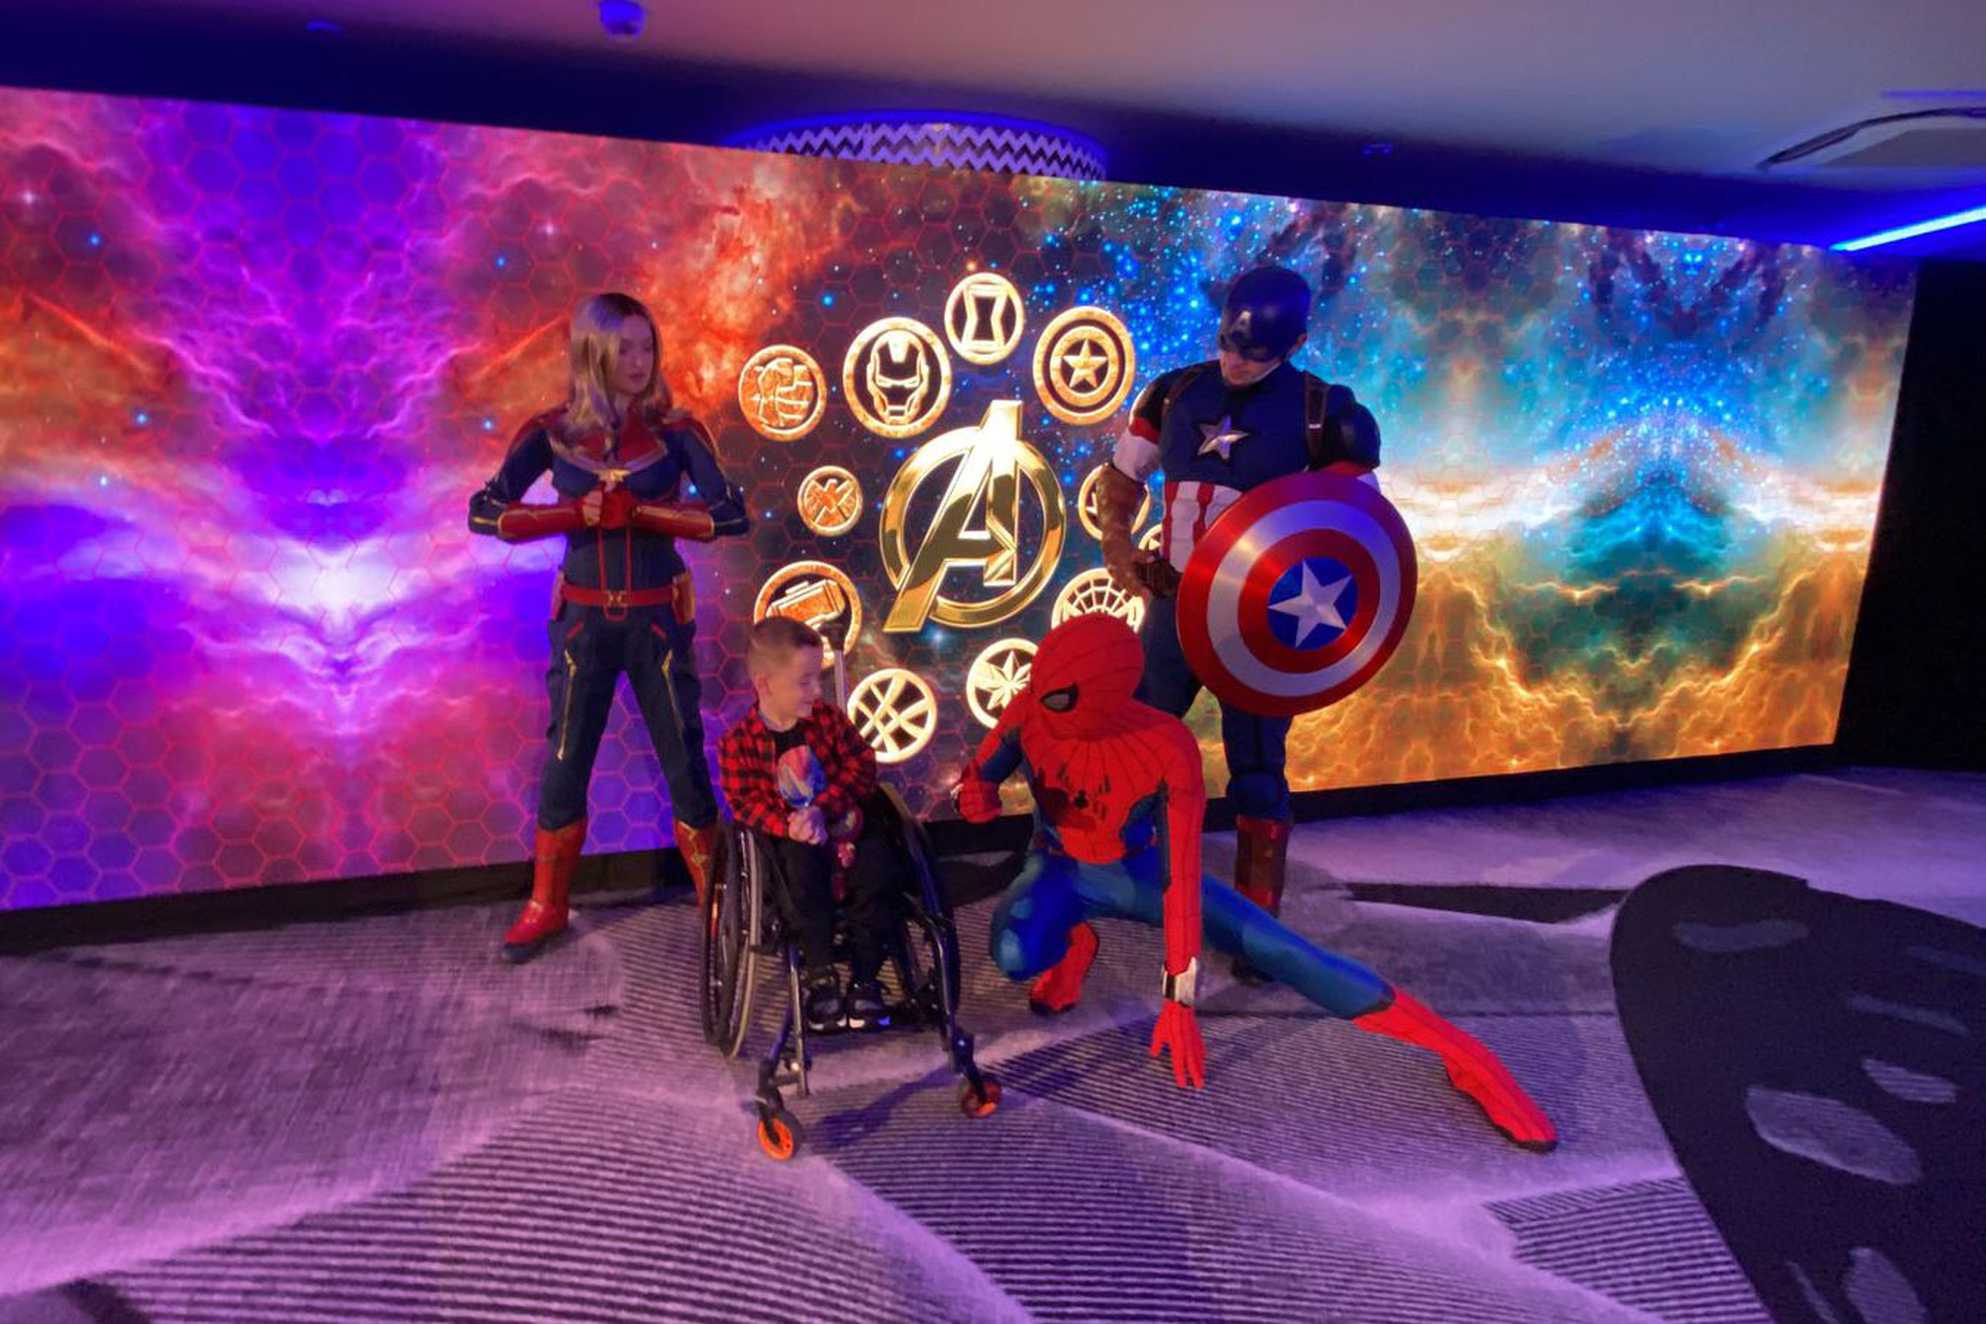 Lincoln posing for a photograph with some Marvel characters.